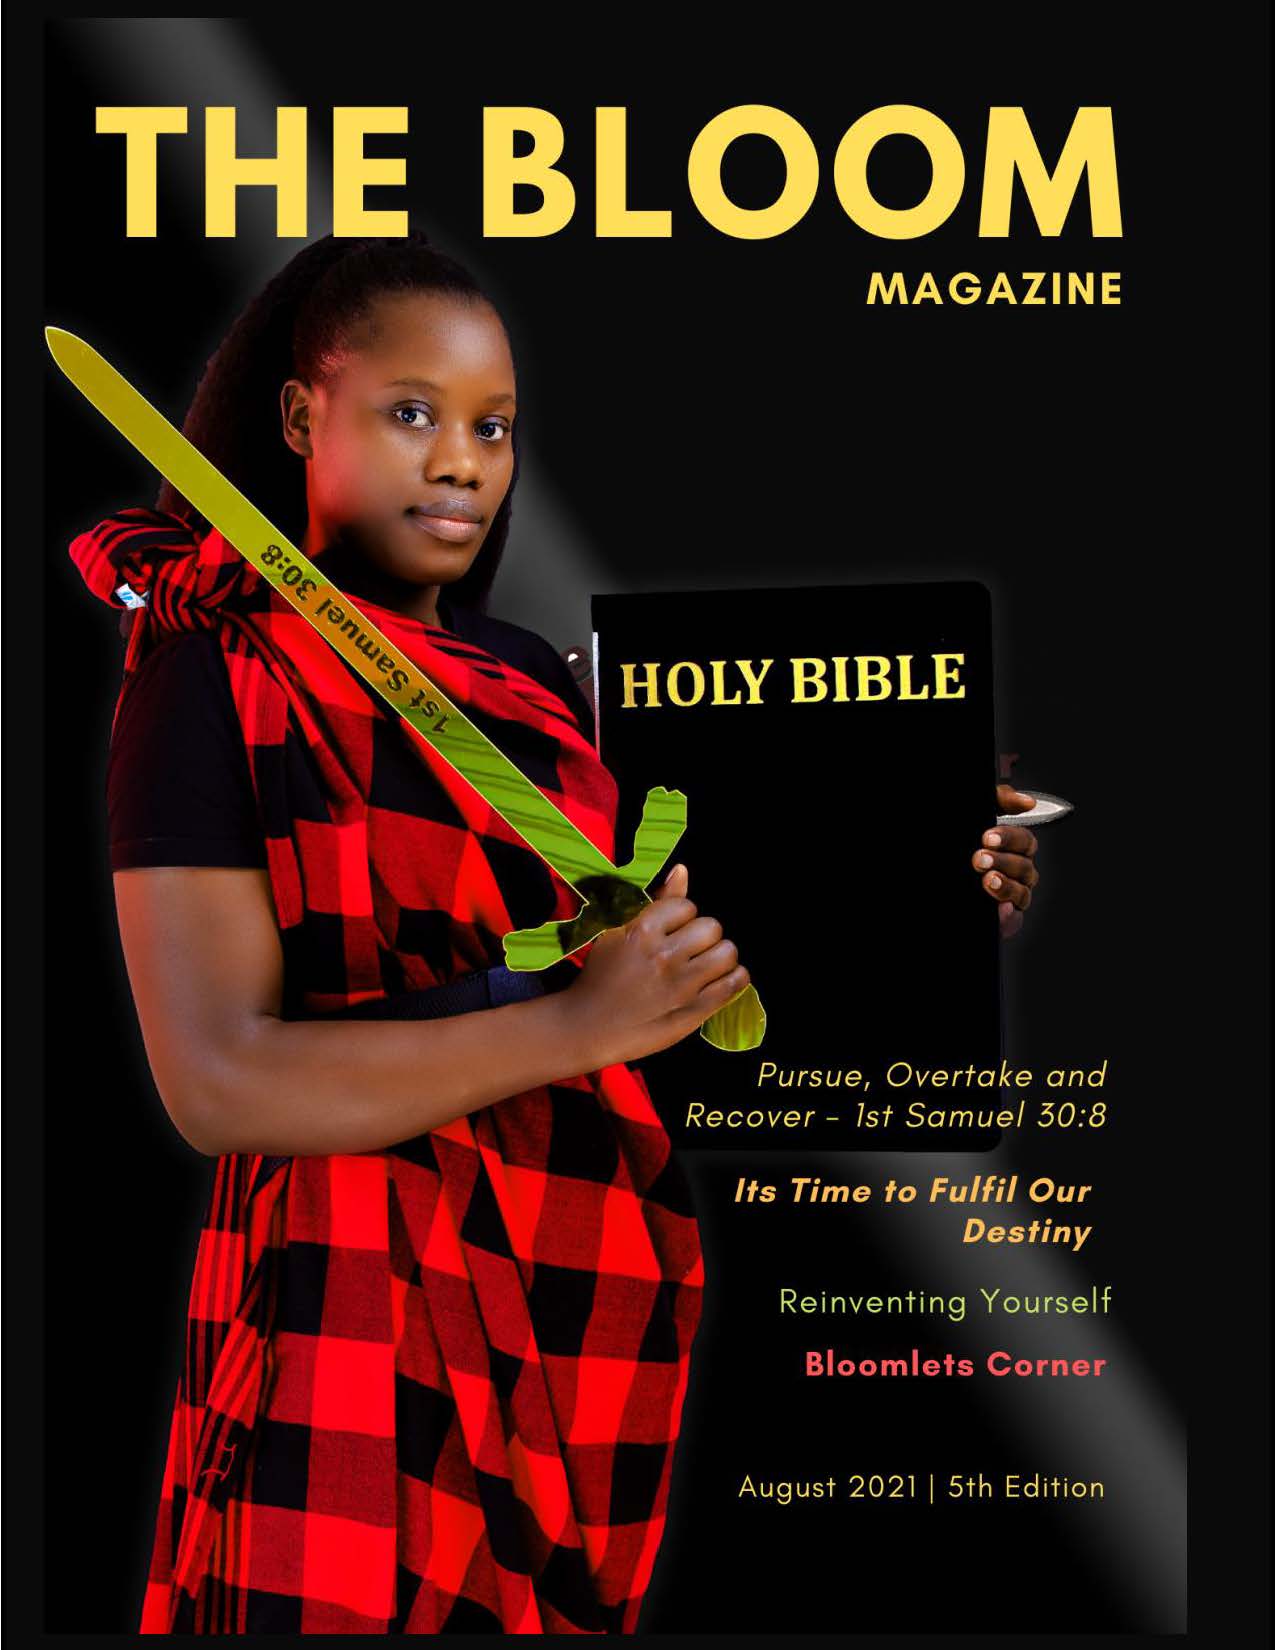 The Blooms Magazine 5th Edition